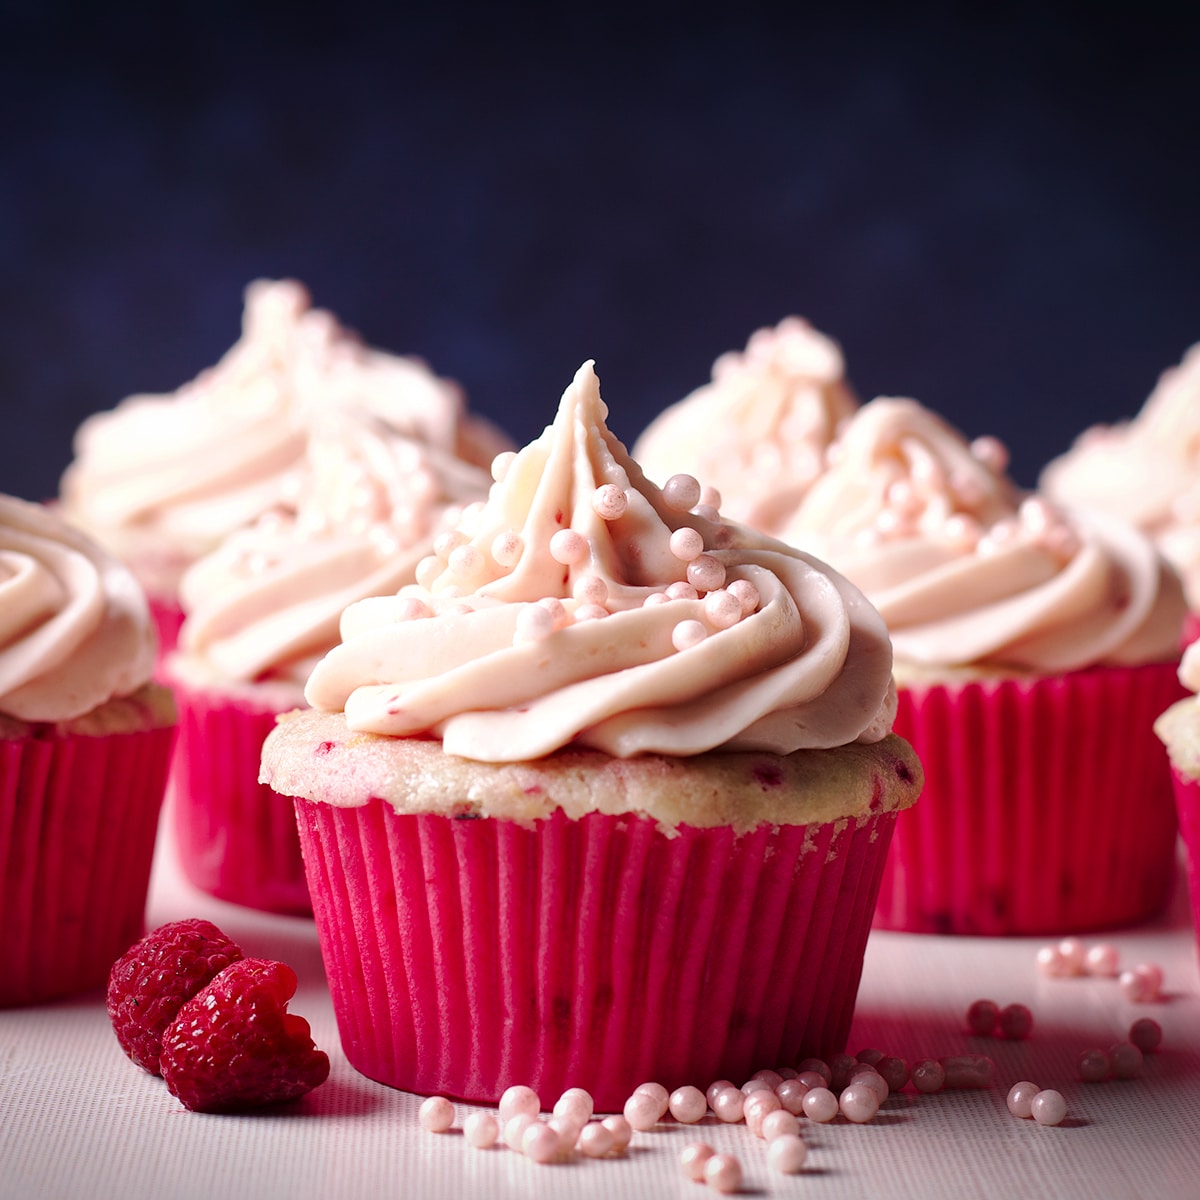 Several raspberry cupcakes topped with a swirl of raspberry cream cheese buttercream.